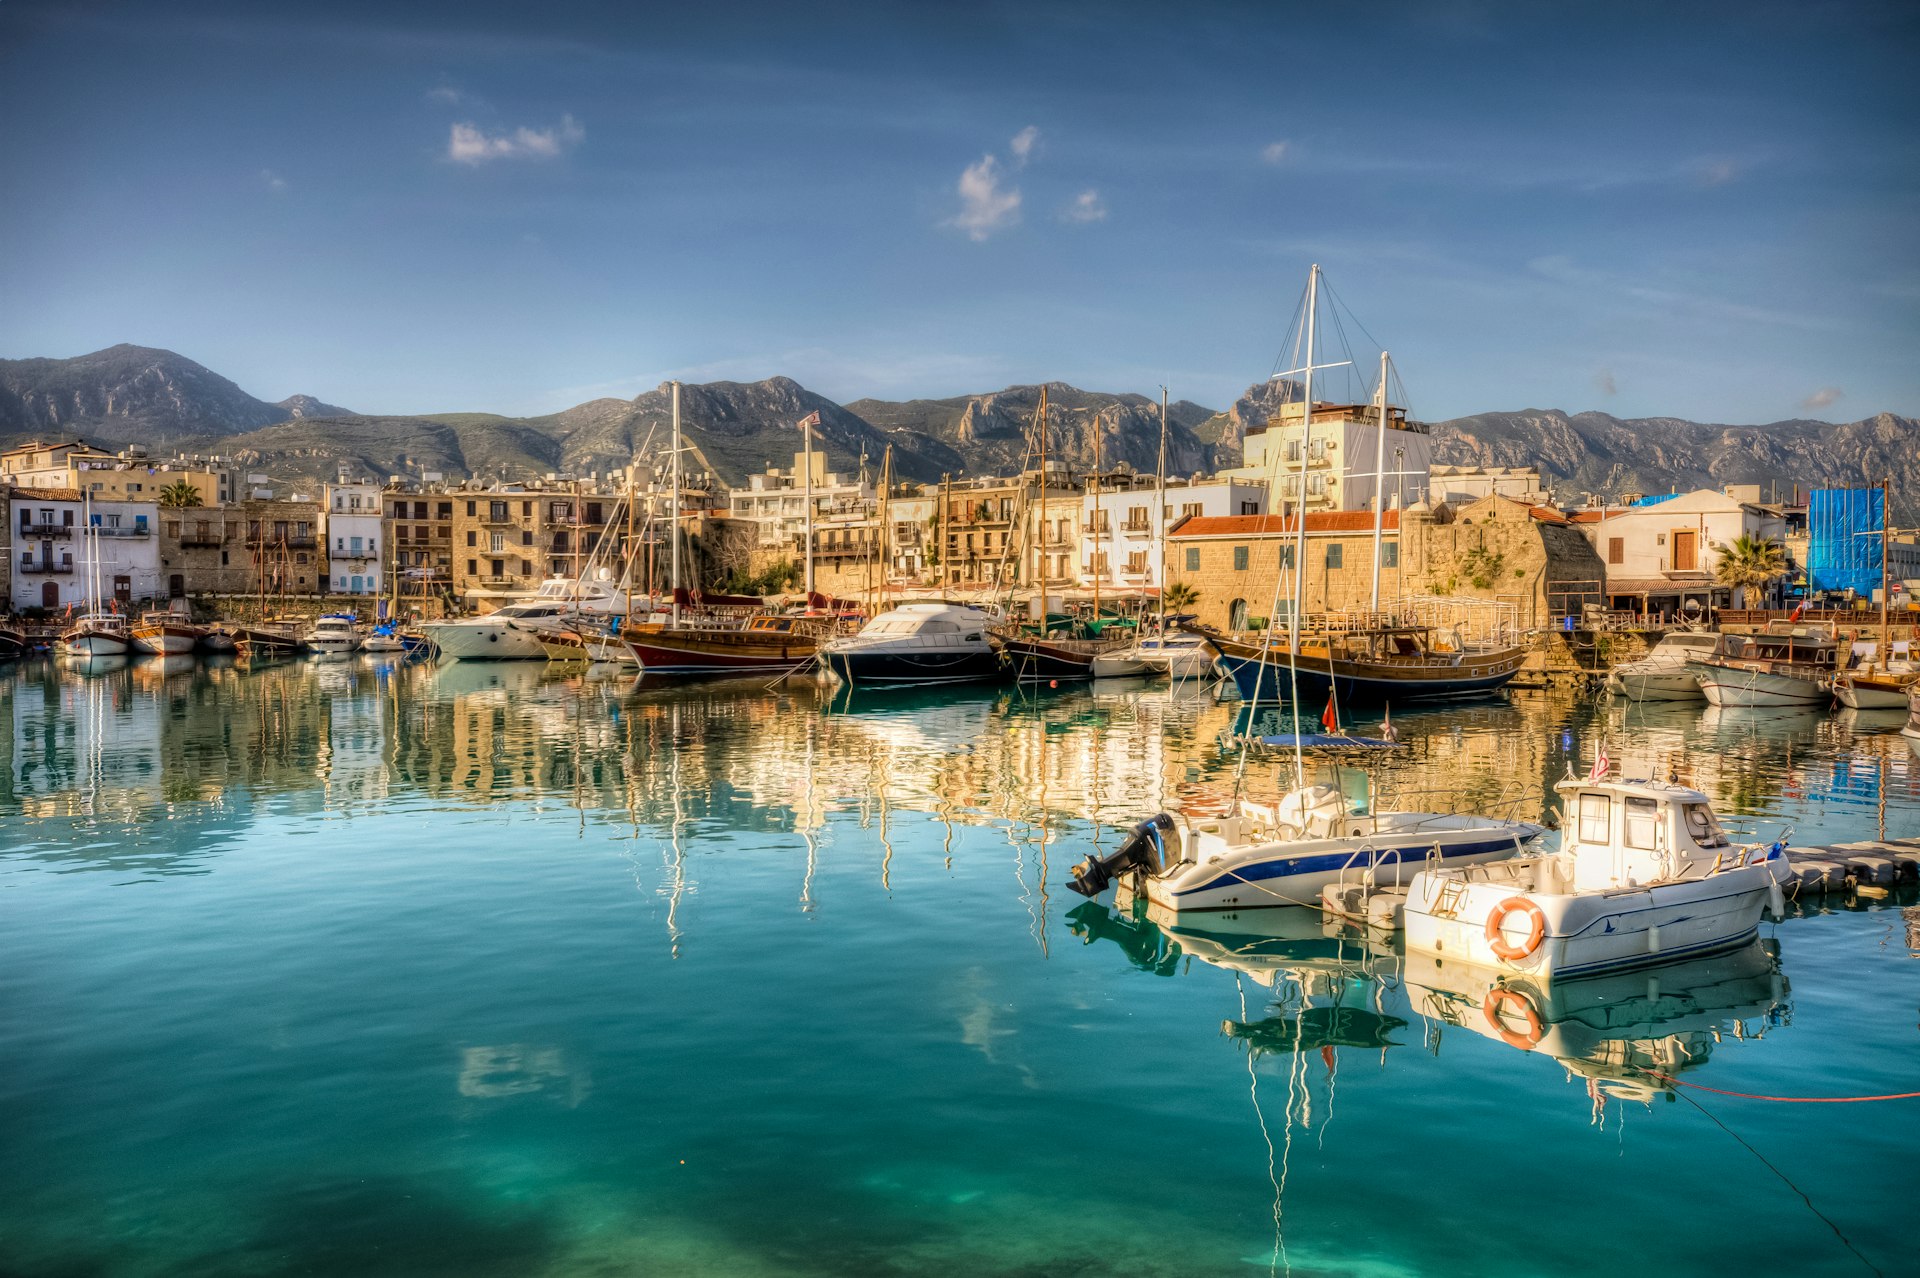 Boats lined up at the ancient harbor in Kyrenia (Girne)